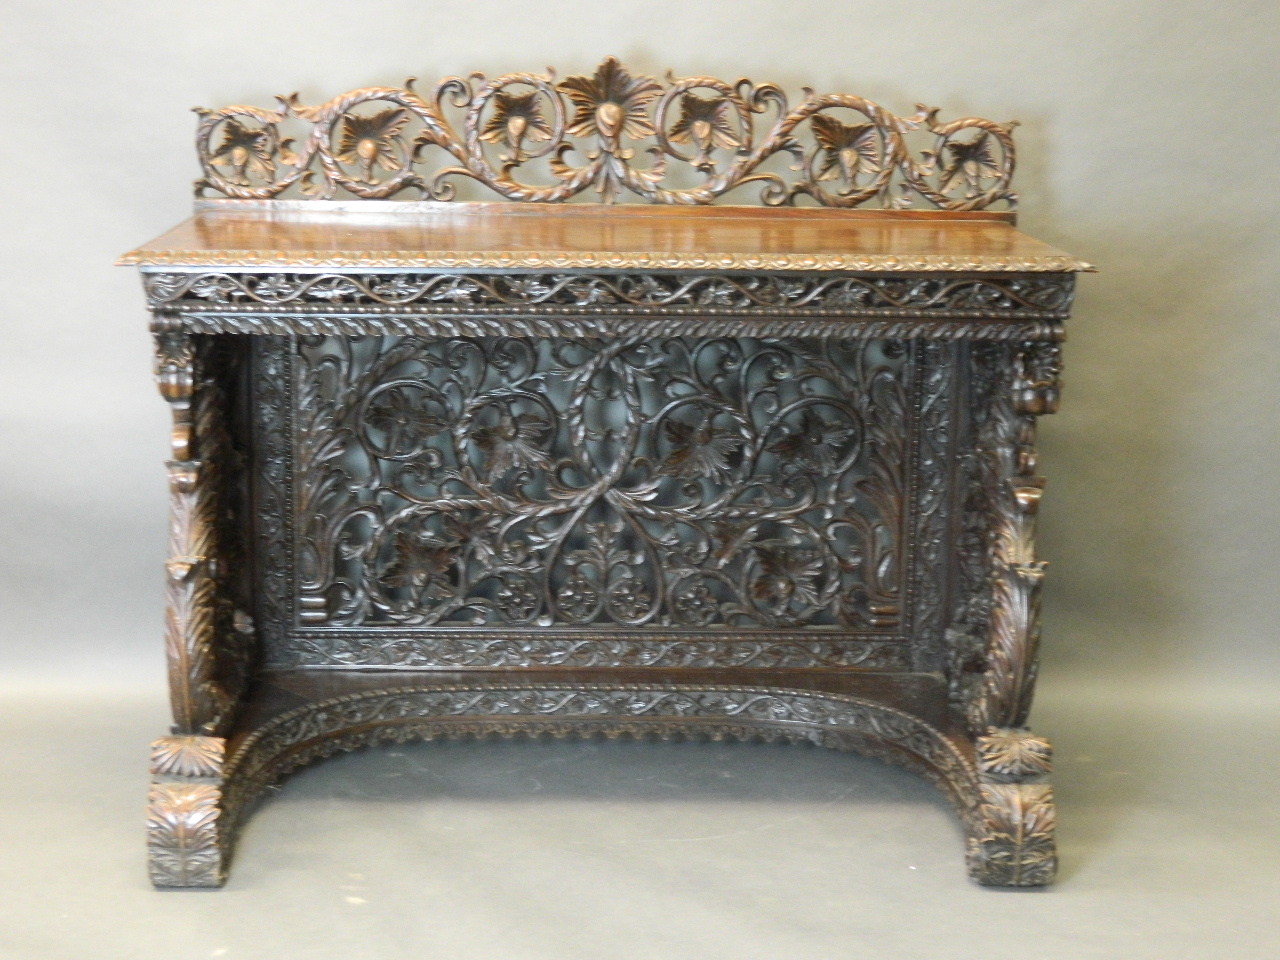 A fine early C19th Anglo-Indian carved teak console table with a pierced and carved back and